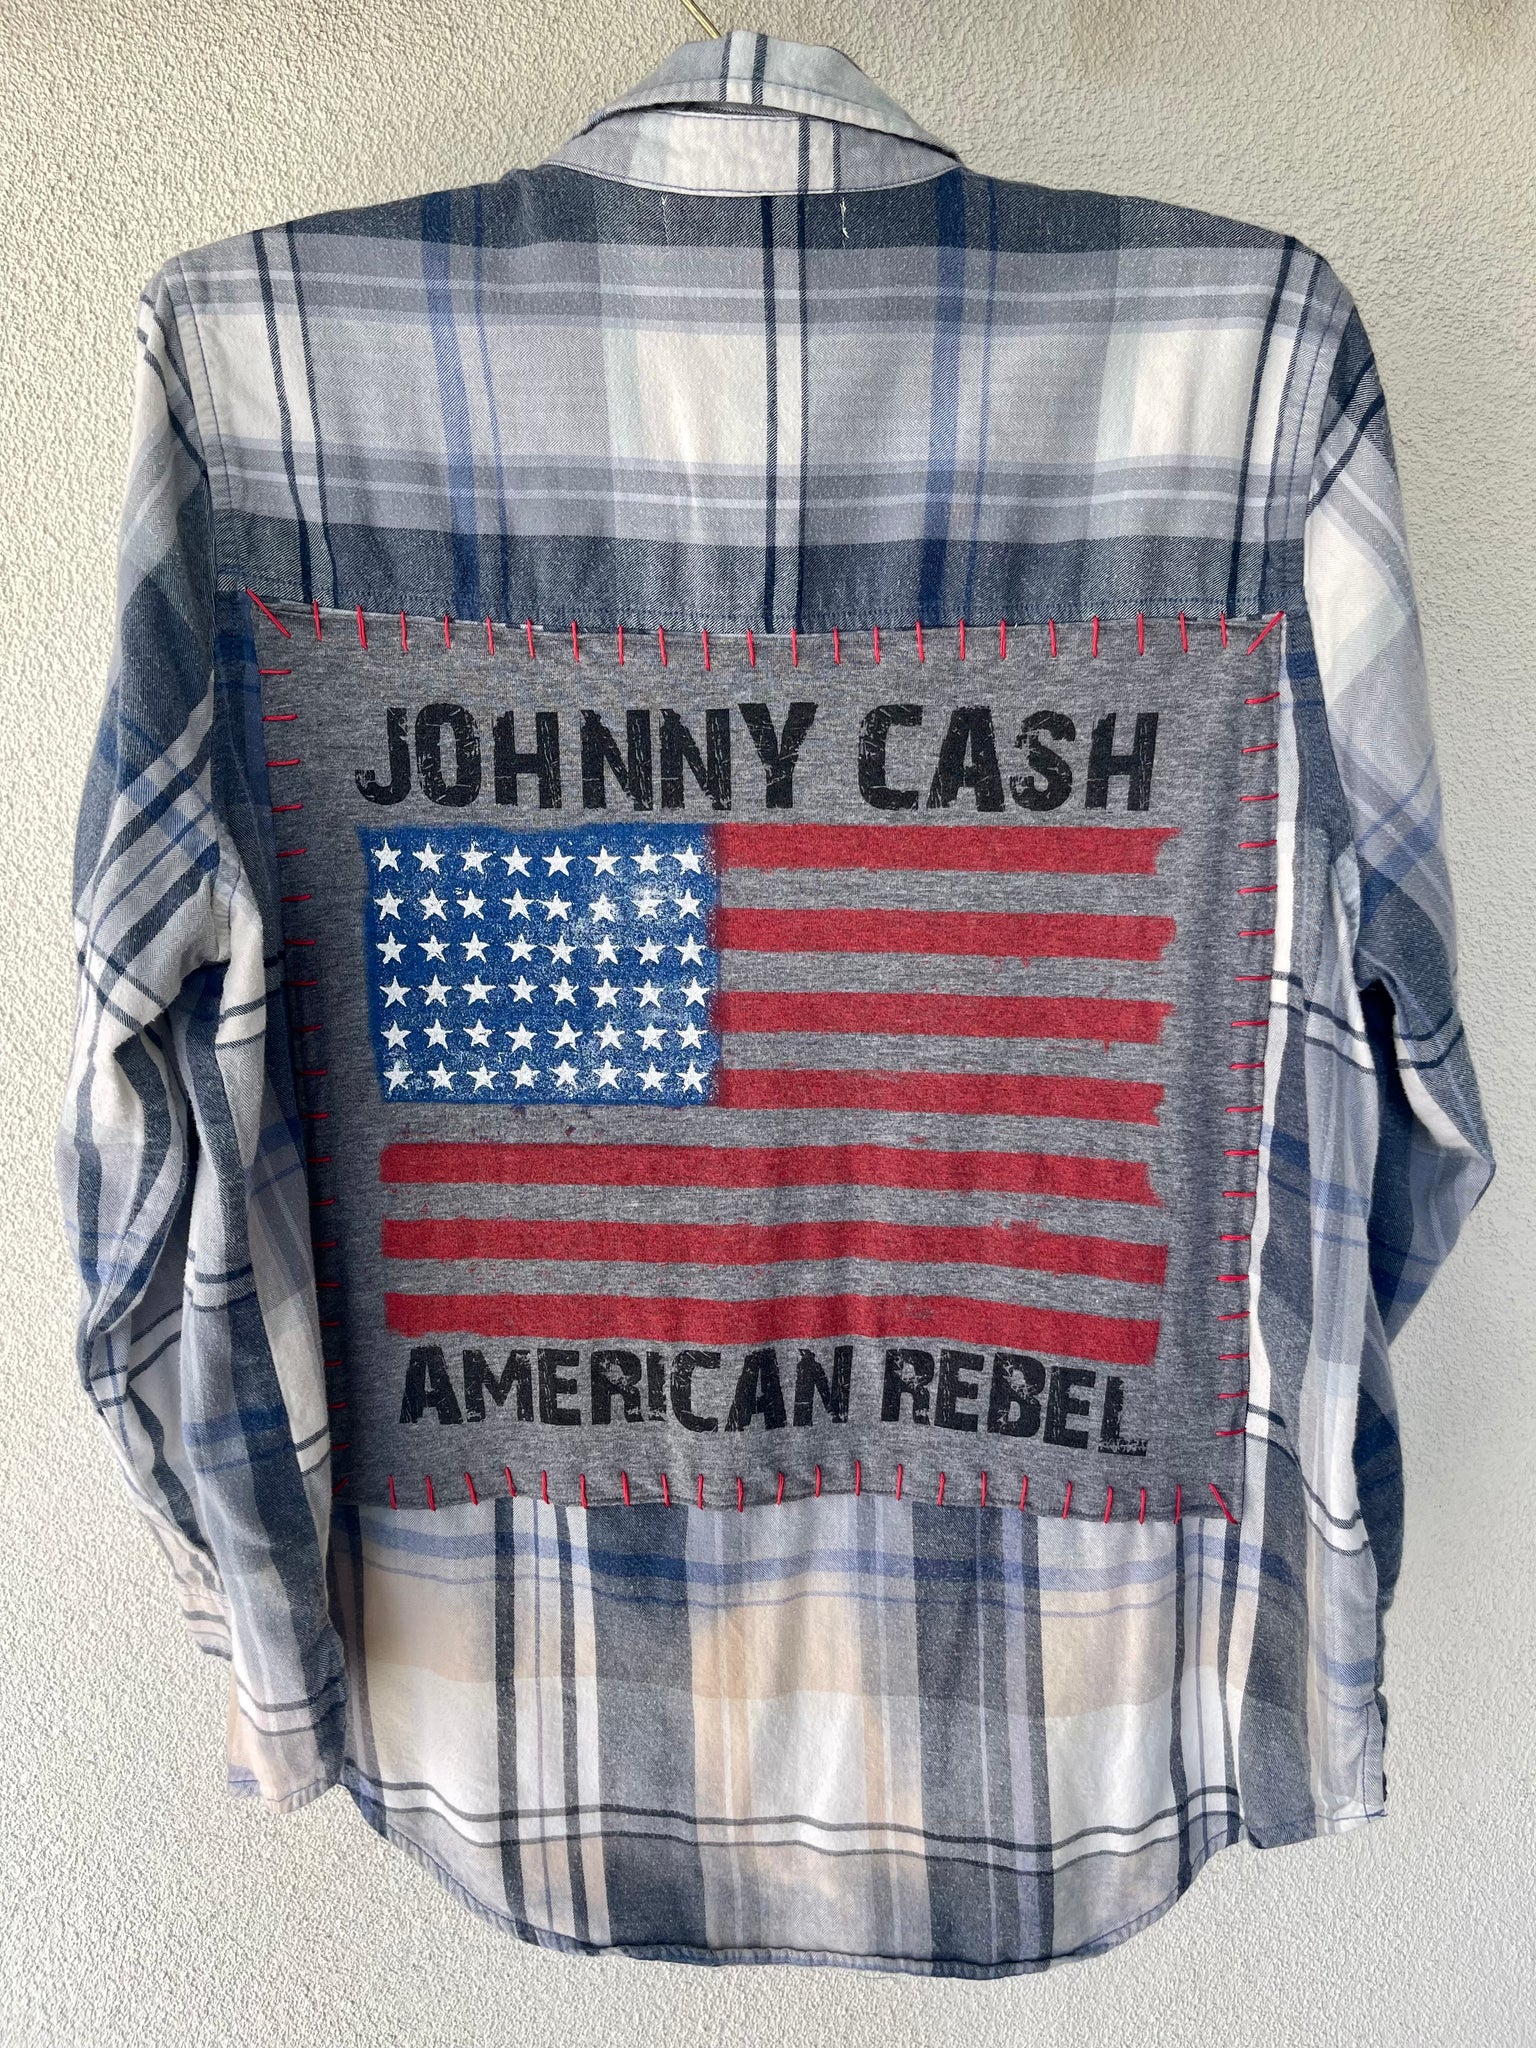 Johnny Cash Upcycled Flannel Shirt